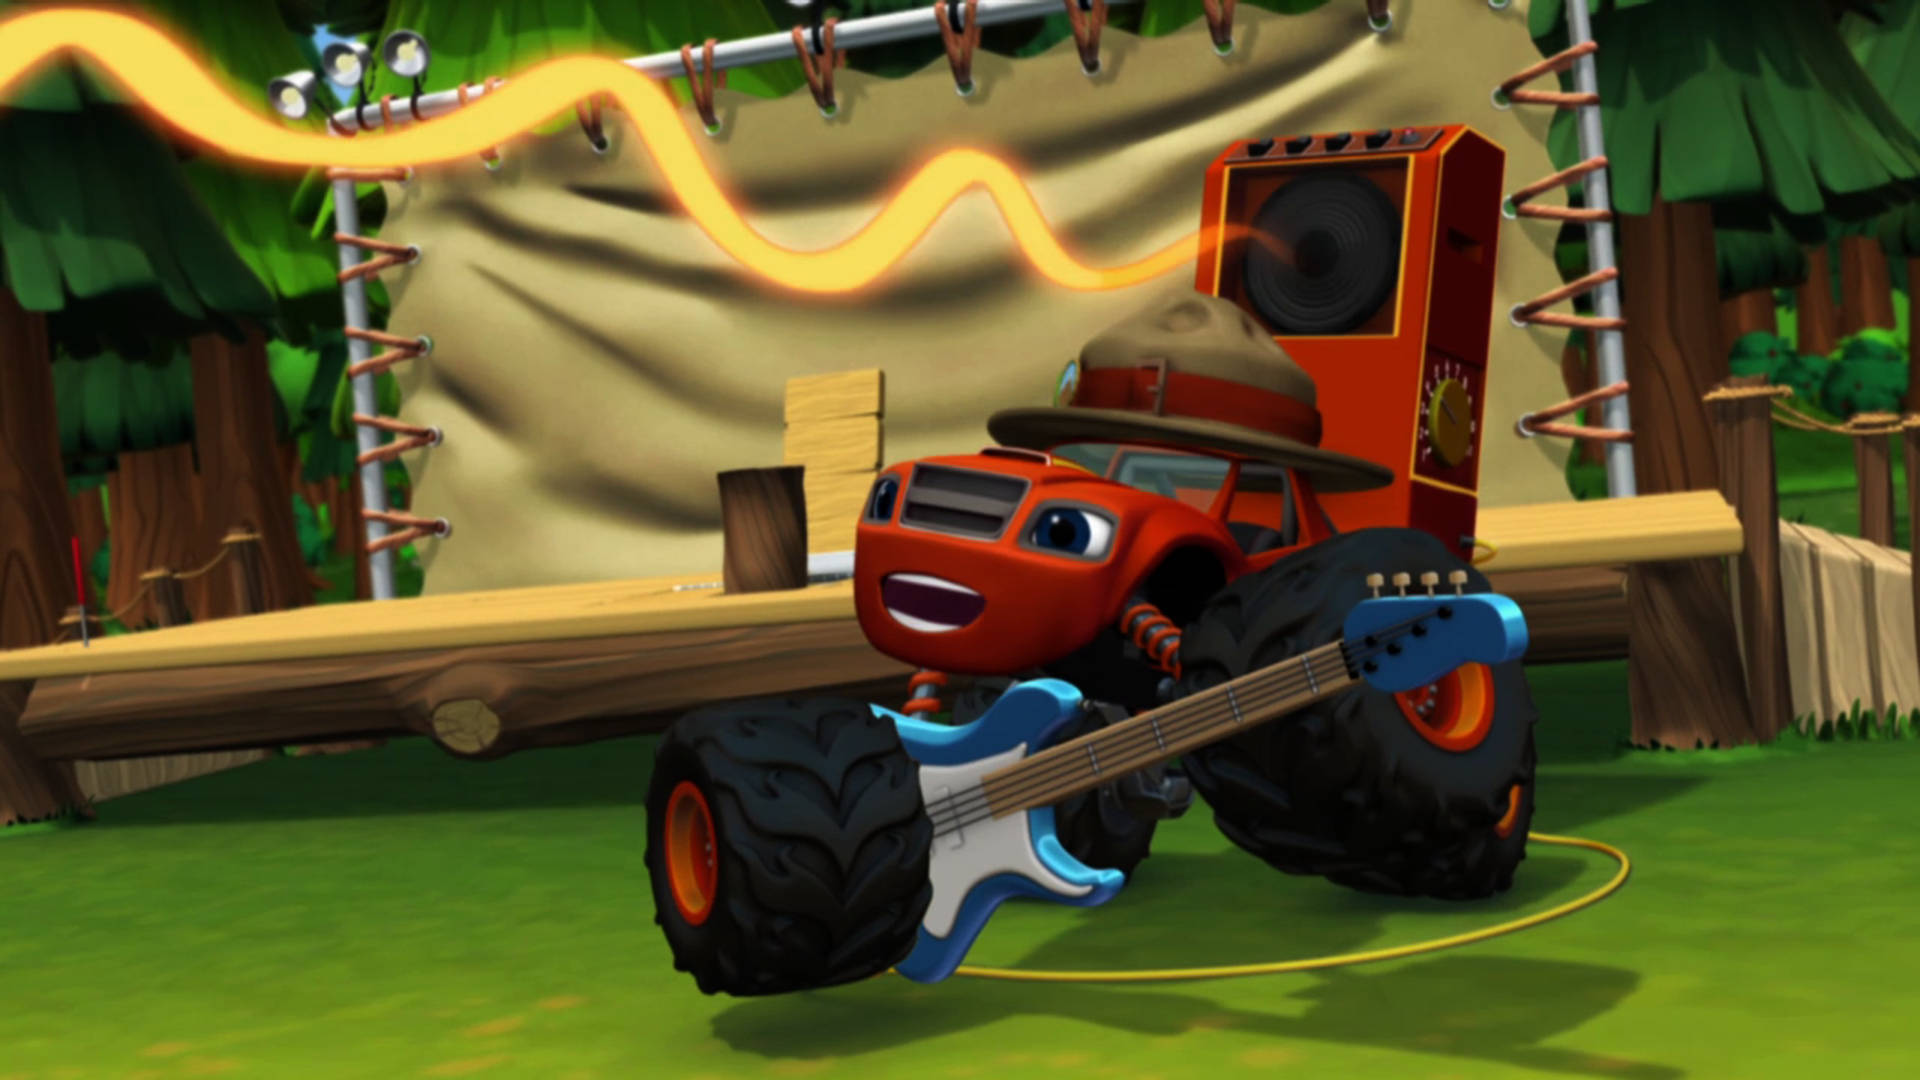 Blaze and the Monster Machines in Action Wallpaper